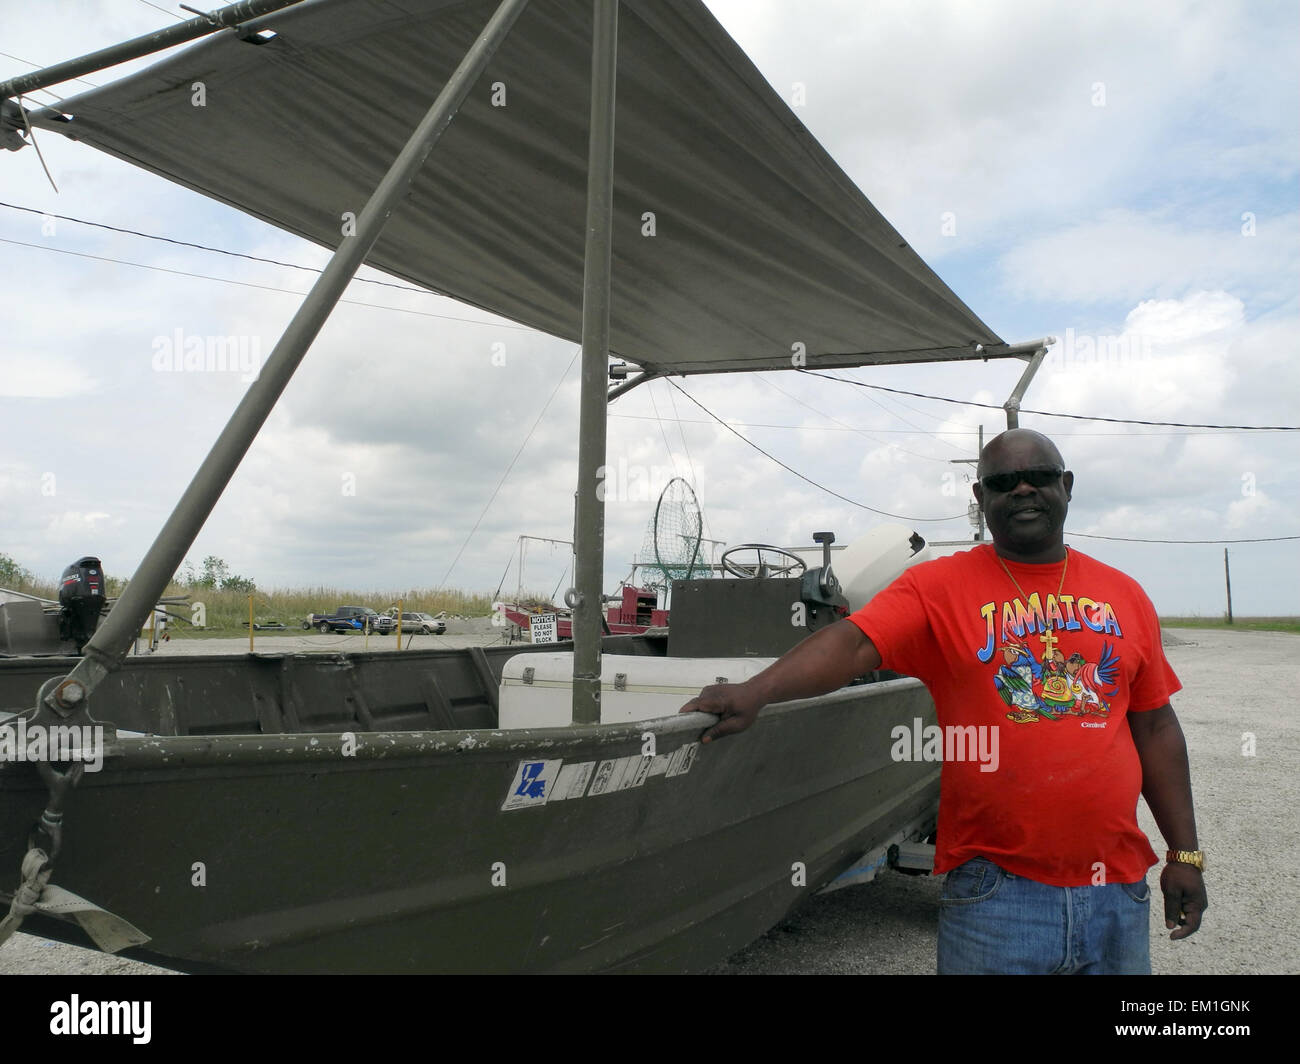 Fisherman Orin Bentley stands next to his fishing boat shows in Pointe à la Hache near New Orleans, US, 6 April 2015. Bentley left the crab fishing business in 2012. Pointe à la Hache is situated at the eastern side of the Mississippi delta, which was the hardest hit area after the Deepwater Horizon oil spill. Bentley was forced to take the 140 000 dollars offered by oil company BP, the largest amount of money he every had in his hand. 20 April 2015 marks the 5th anniversary of the Deepwater Horizon catastrophe in the Gulf of Mexico which took place on 20 April 2010. Photo: Johannes Schmitt Stock Photo